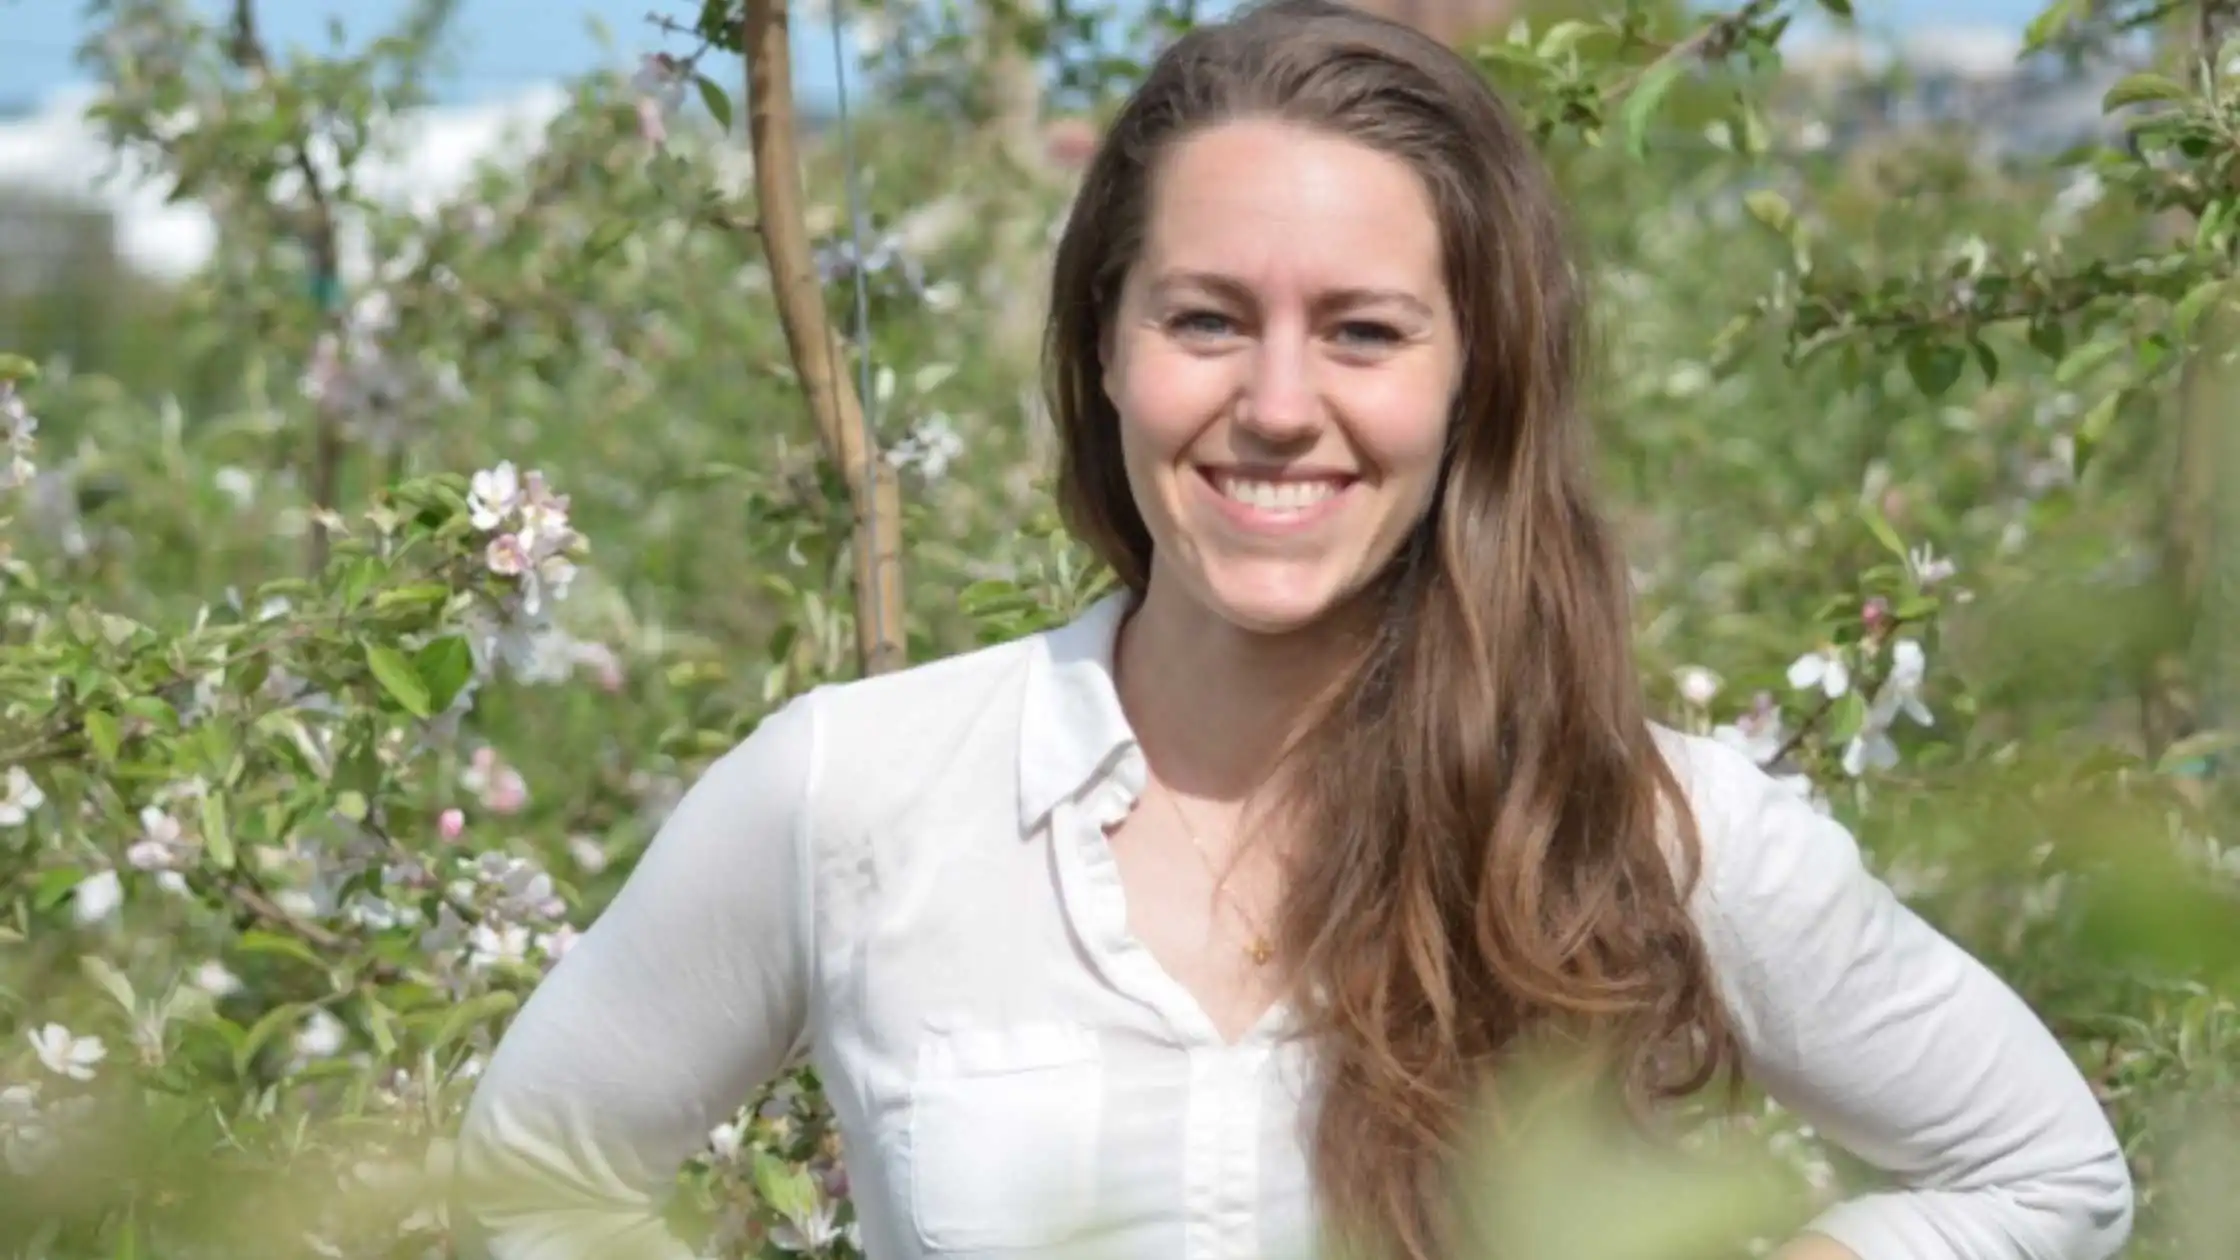 Cultivating her own farm aids Cornell keep hemp research-grounded